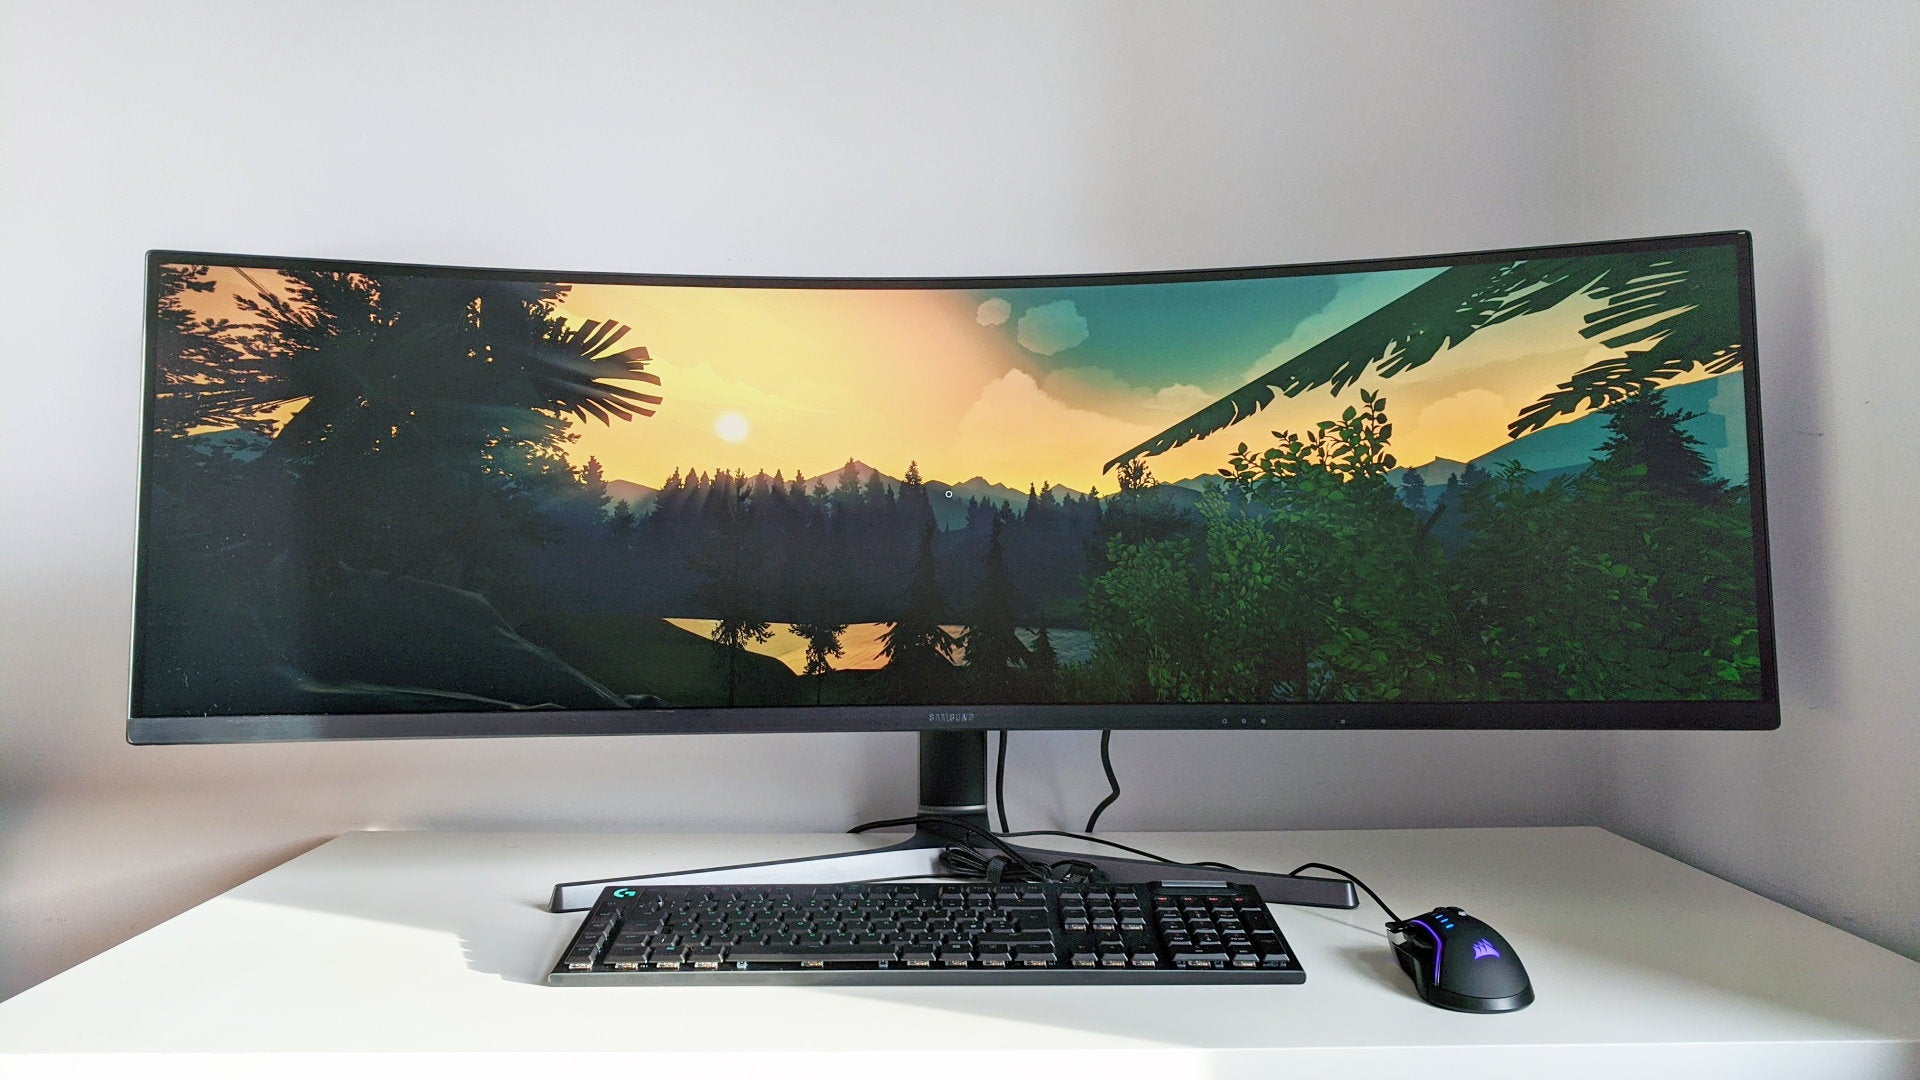 A photo of an ultrawide gaming monitor running Firewatch